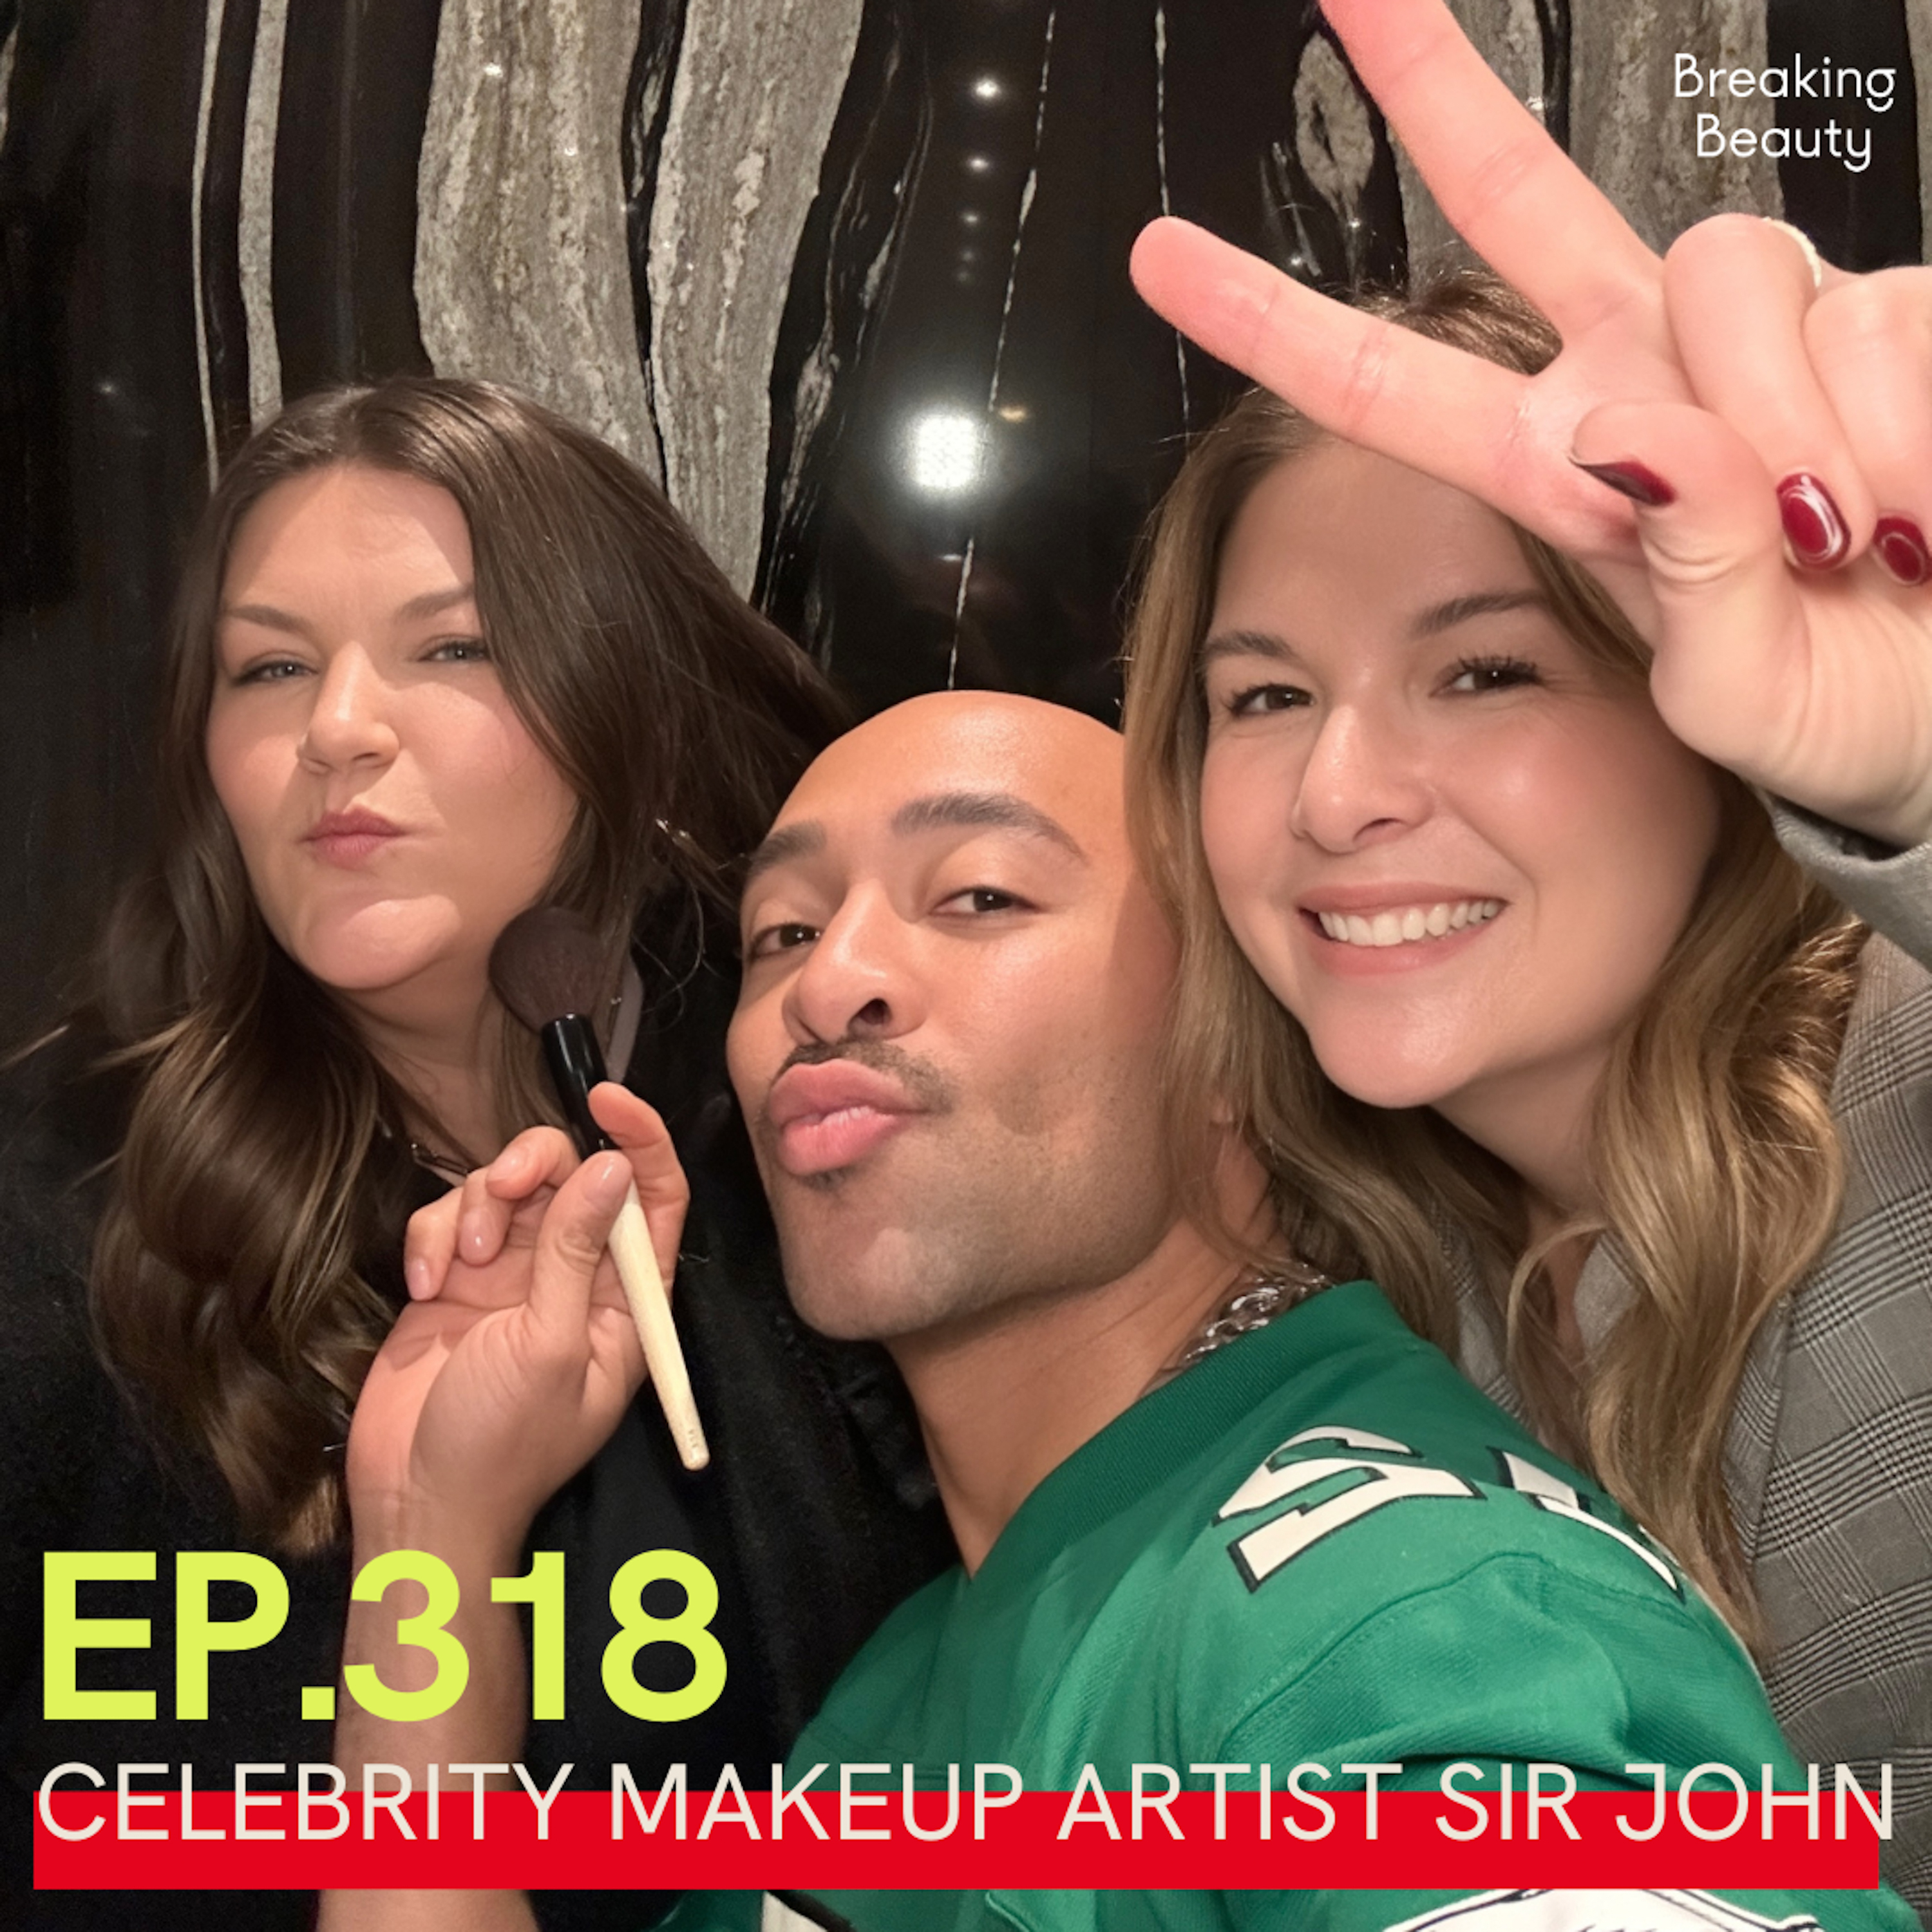 Are You Applying Your Foundation The Right Way? How-to Find the Perfect Shade, Formula, Layering Tips and More With Beyonce’s Makeup Artist Sir John